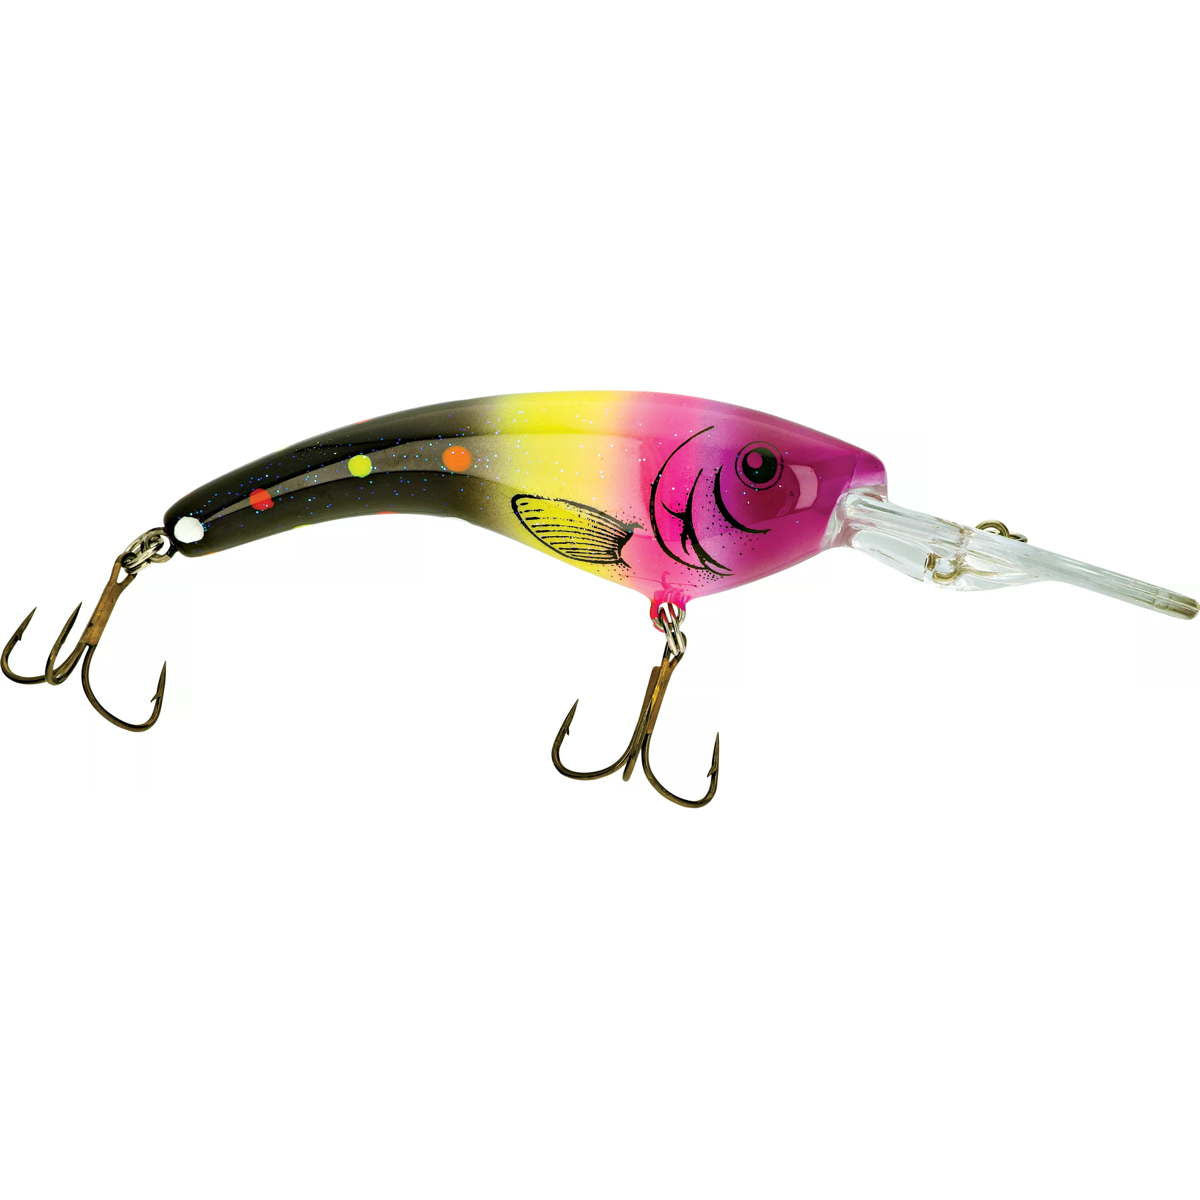 Photo of Reef Runner Ripshad 44 Mag for sale at United Tackle Shops.